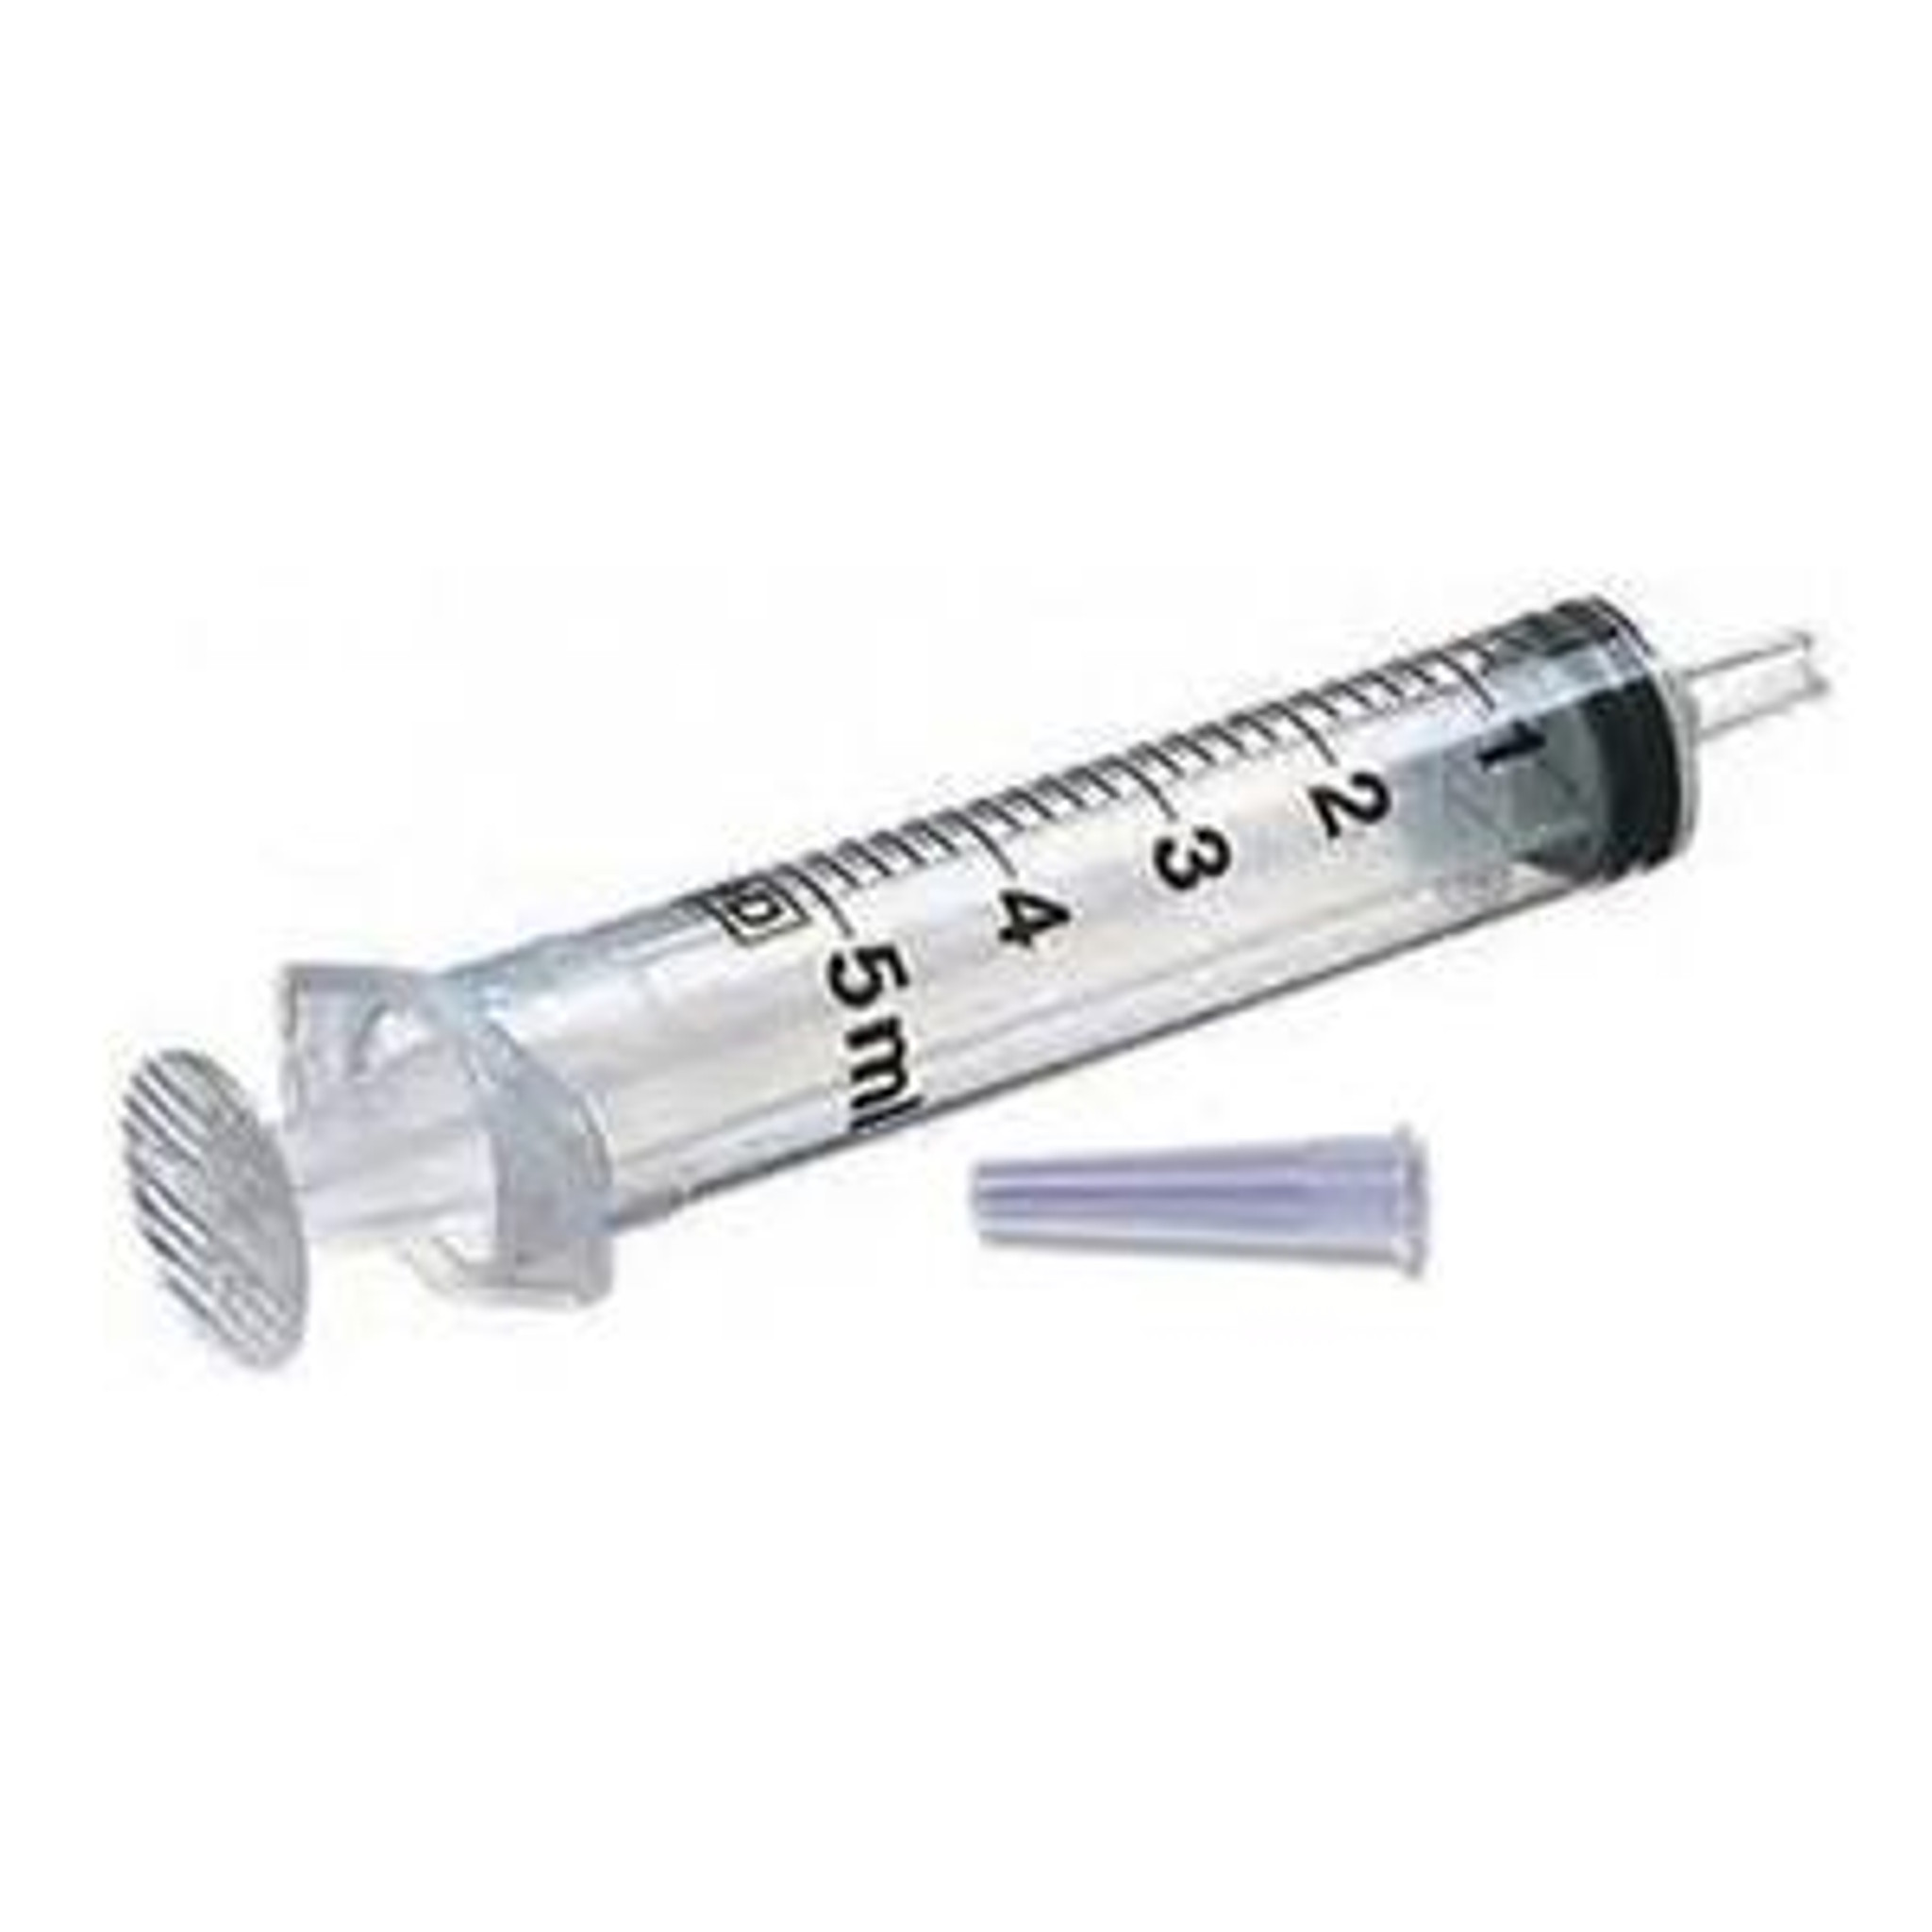 BD Barrel Oral Syringe, with Non Luer Tip, 5 mL, Clear-100ea